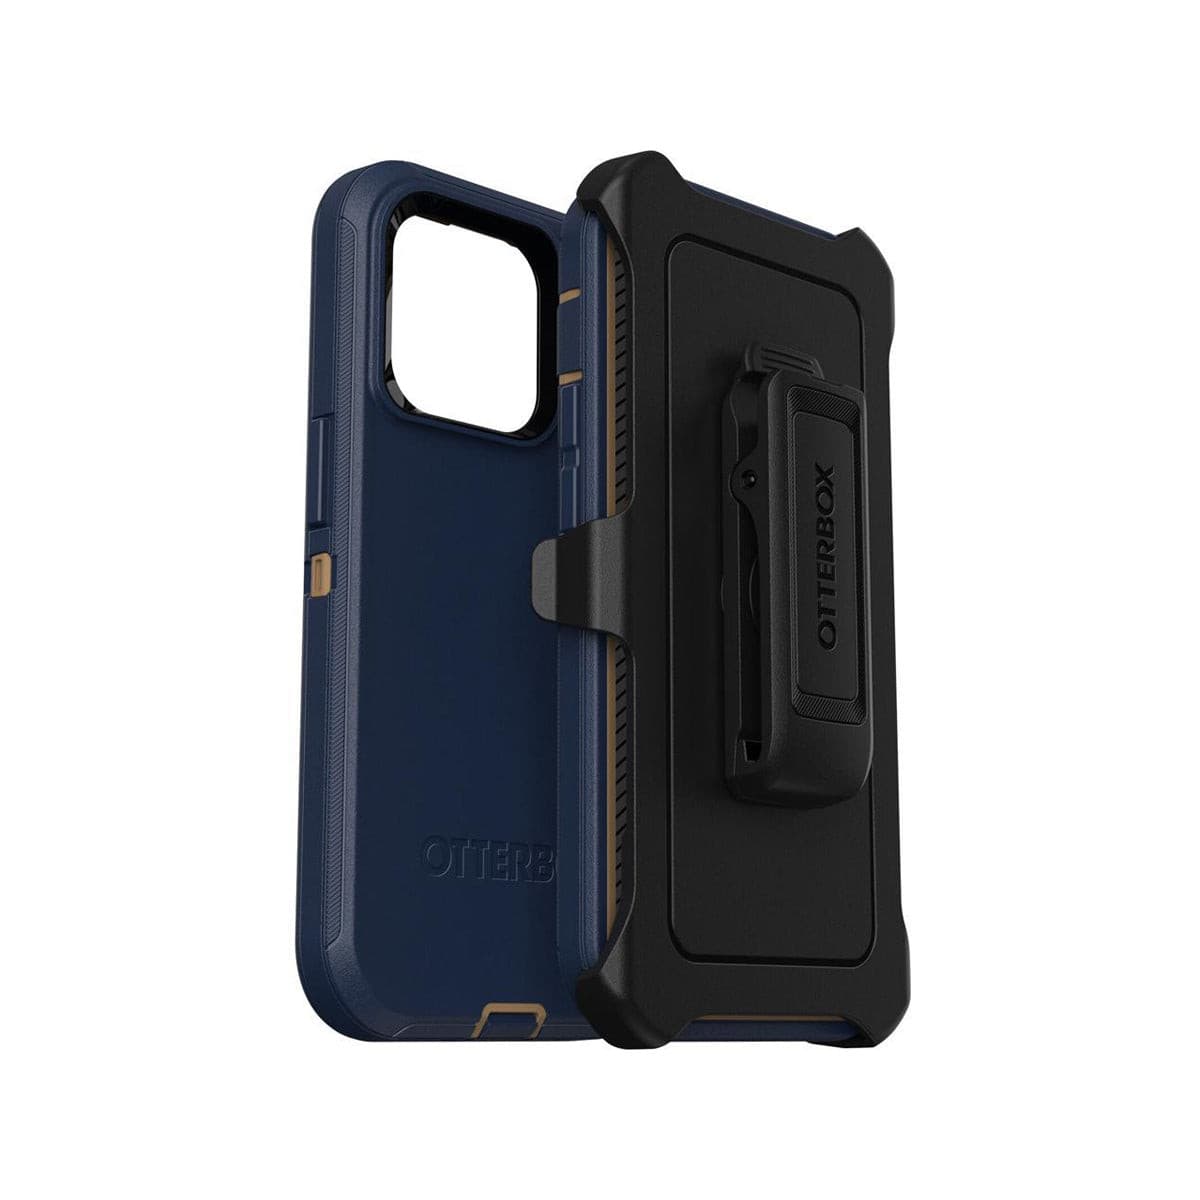 OtterBox Defender Case for iPhone 14 Pro.